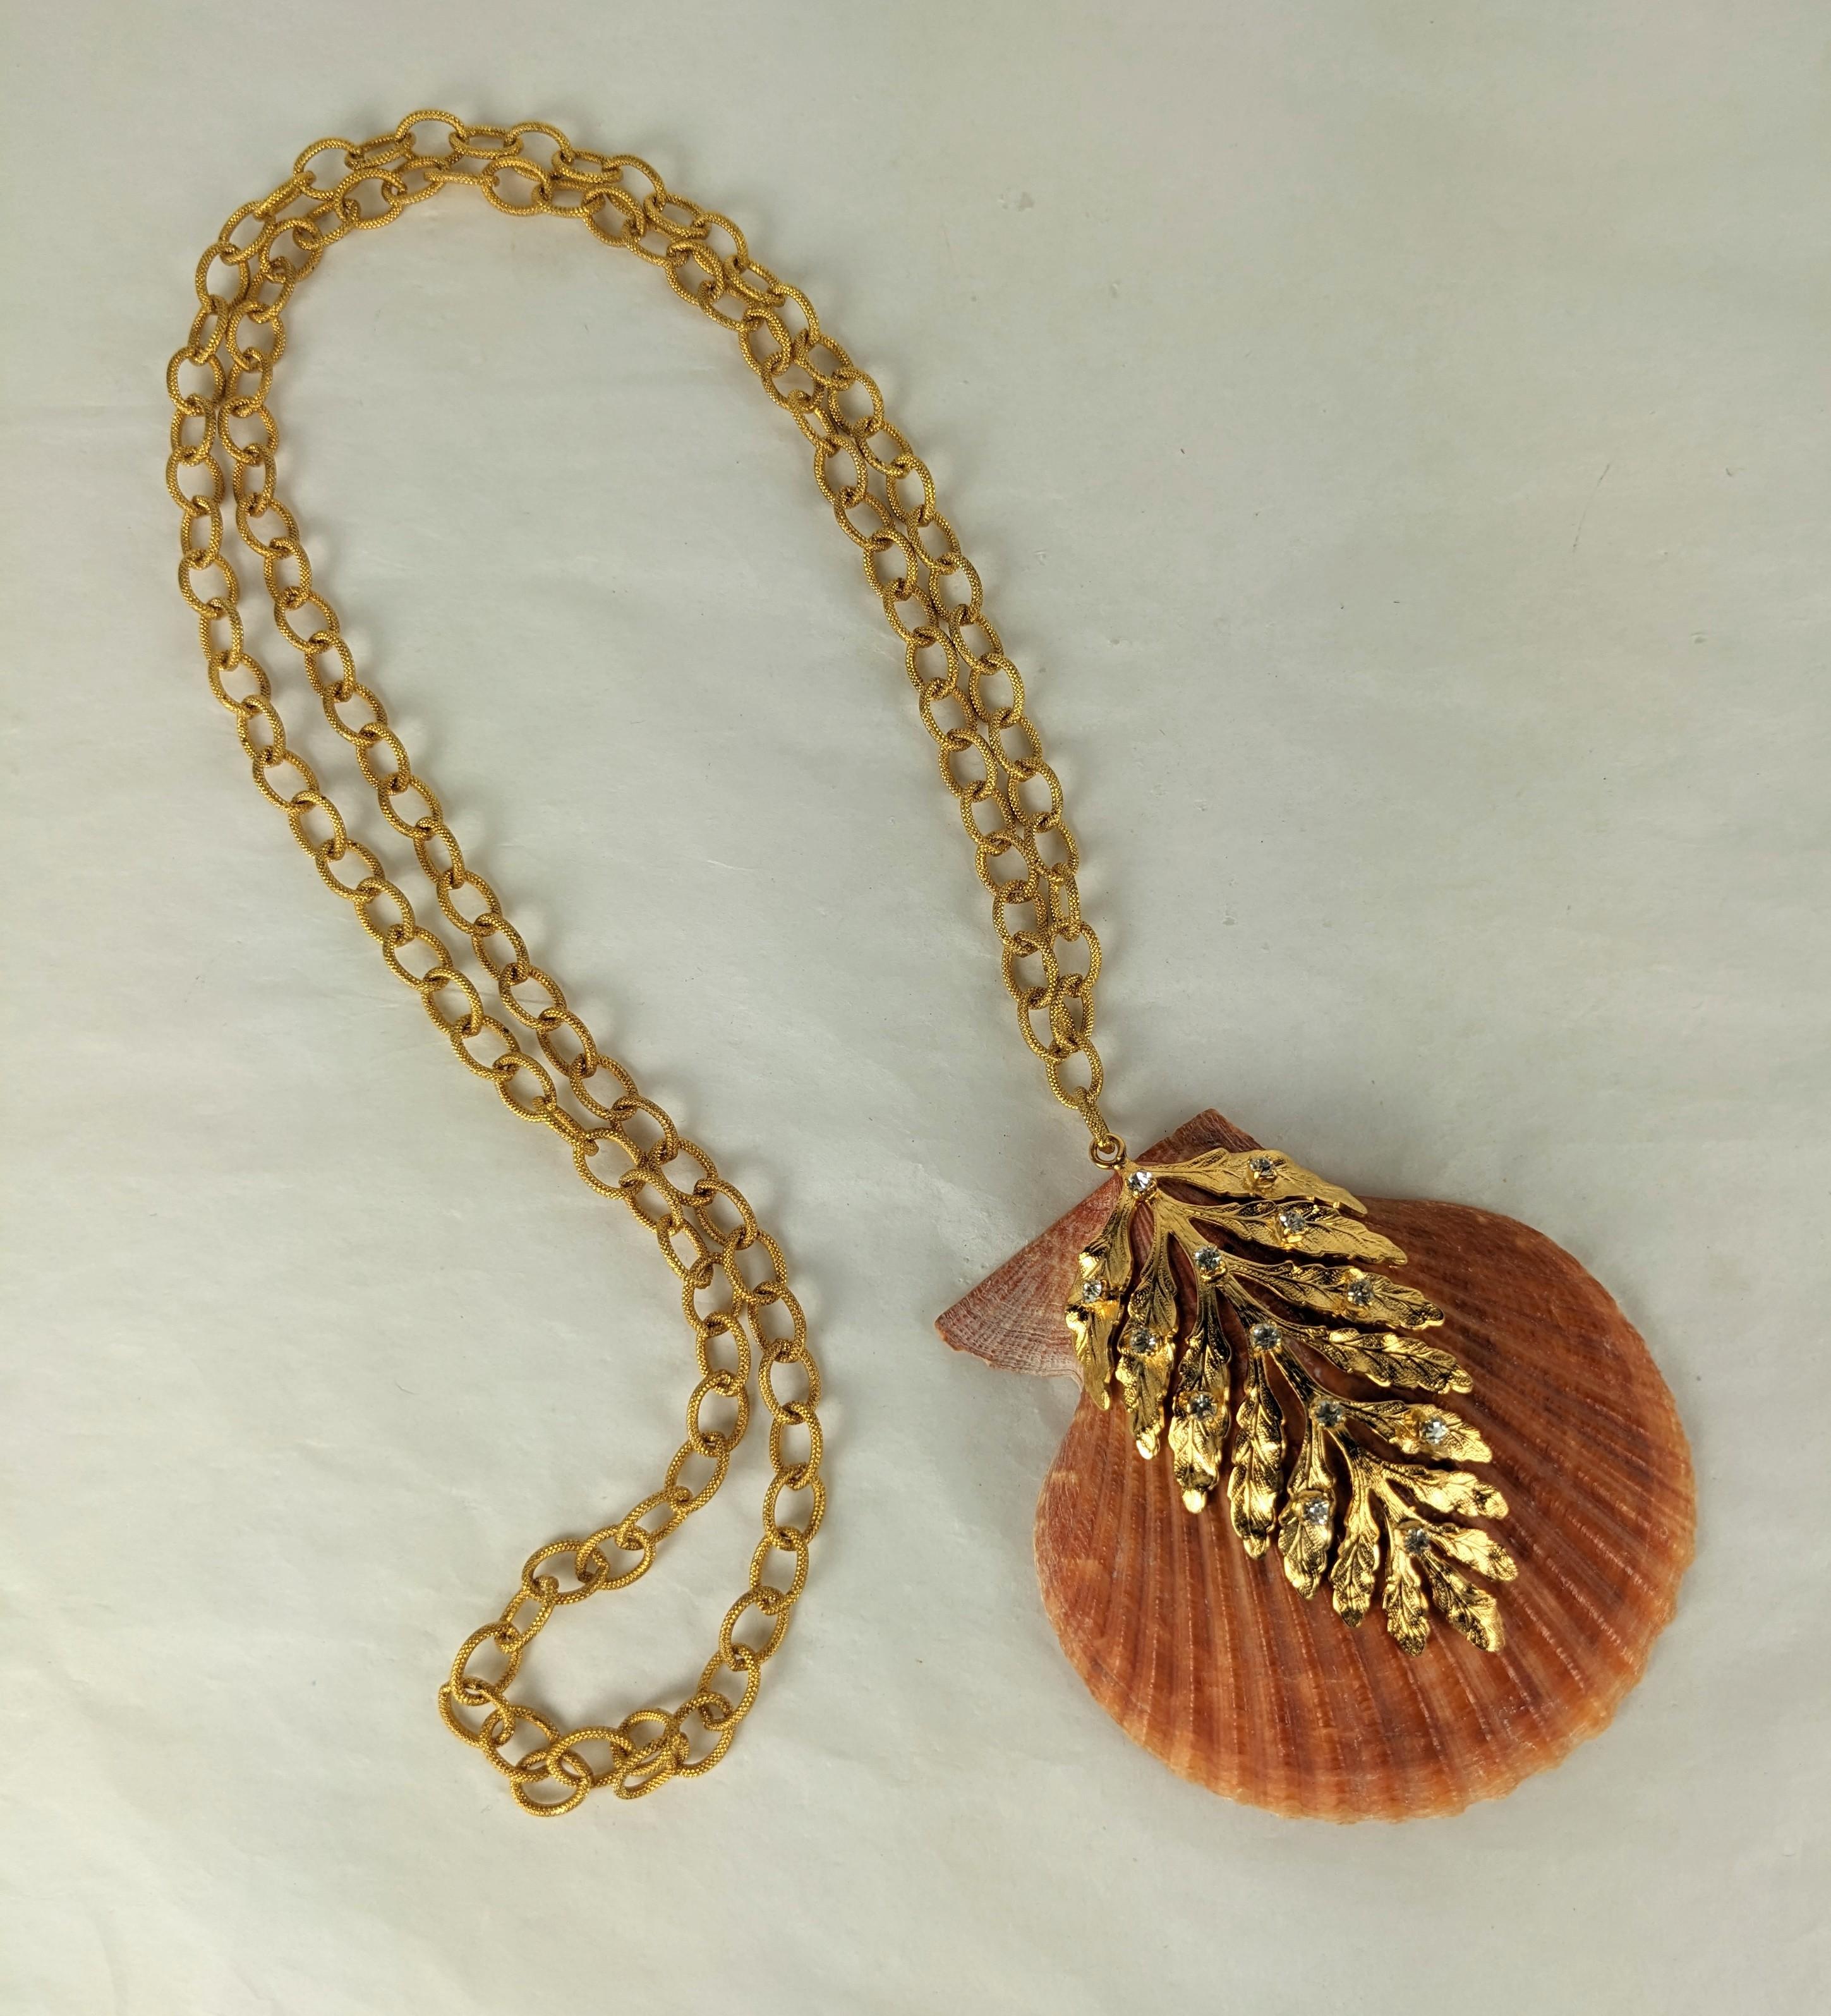 Coral Orange Lion Paw Scallop Shell pendant necklace from MWLC. The natural shell decorated with a gilt plate bronze fern frond, decorated with prong set crystal rhinestones, made in the Parisian studios of MWLC. Textured matte gold chain slips over